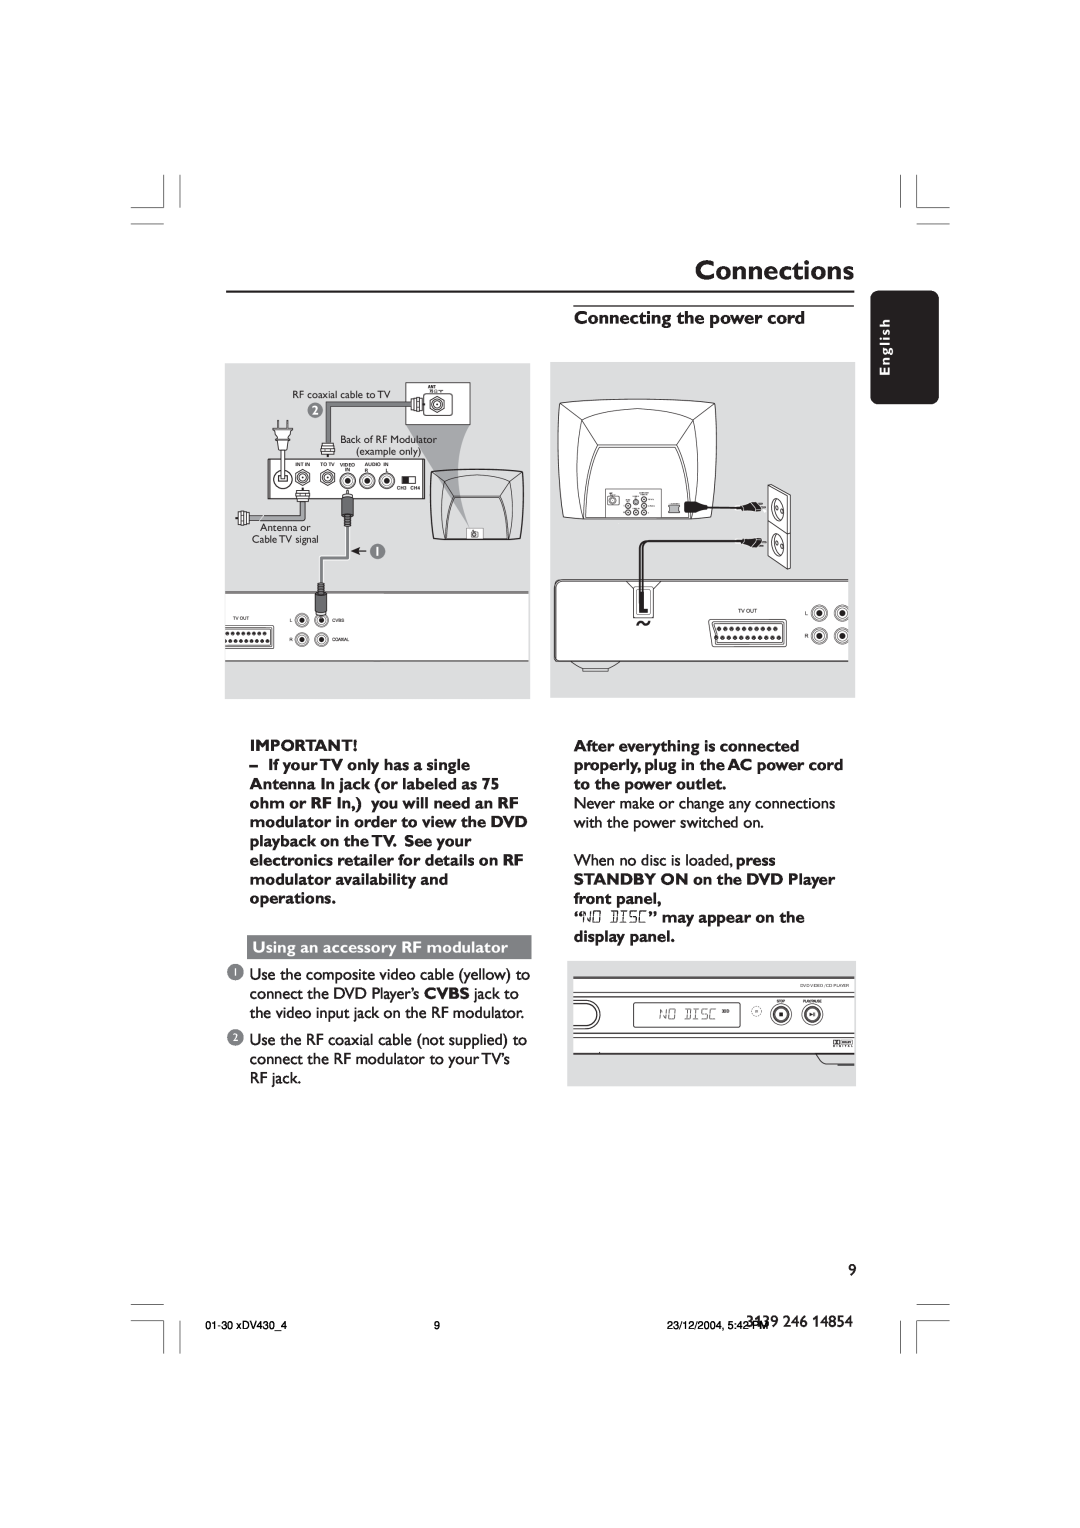 Philips MMS430 user manual Connecting the power cord, Connections, Using an accessory RF modulator 